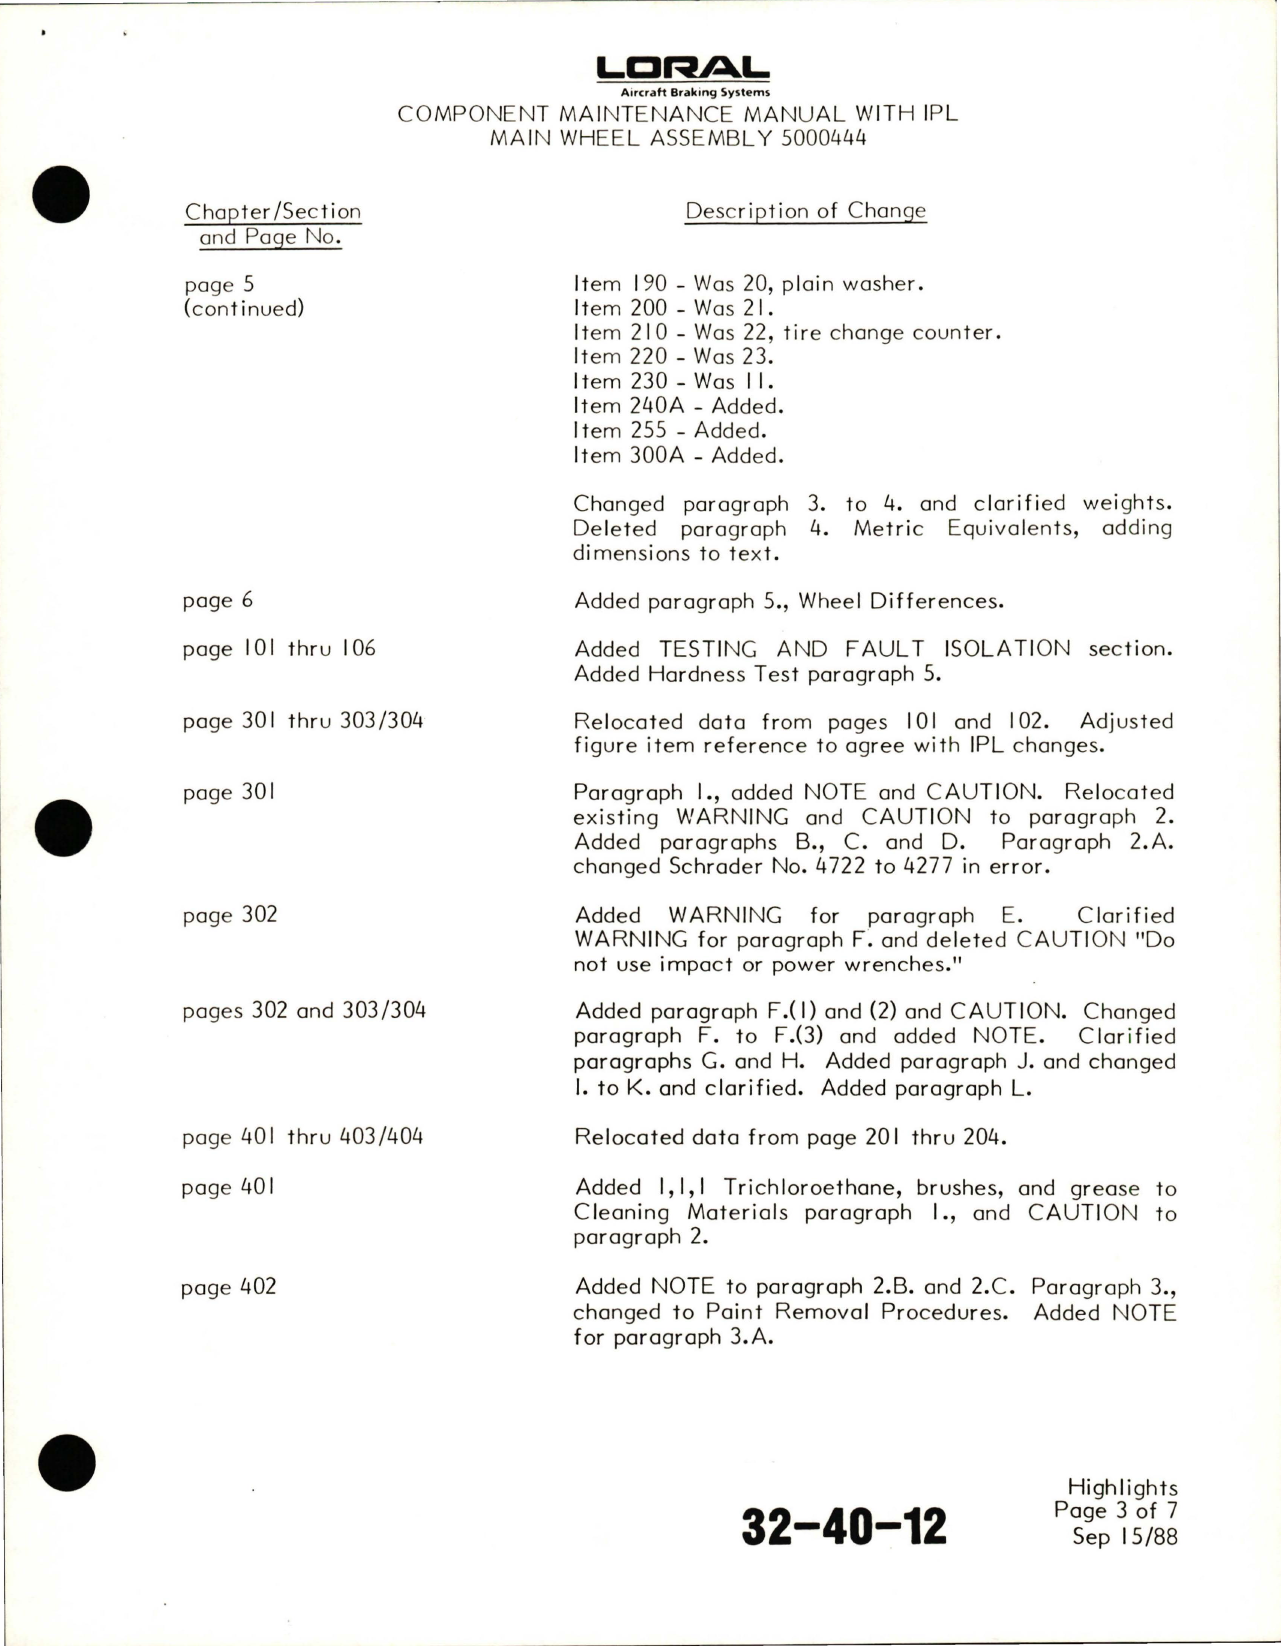 Sample page 9 from AirCorps Library document: Maintenance Manual with Illustrated Parts List for Main Wheel Assembly